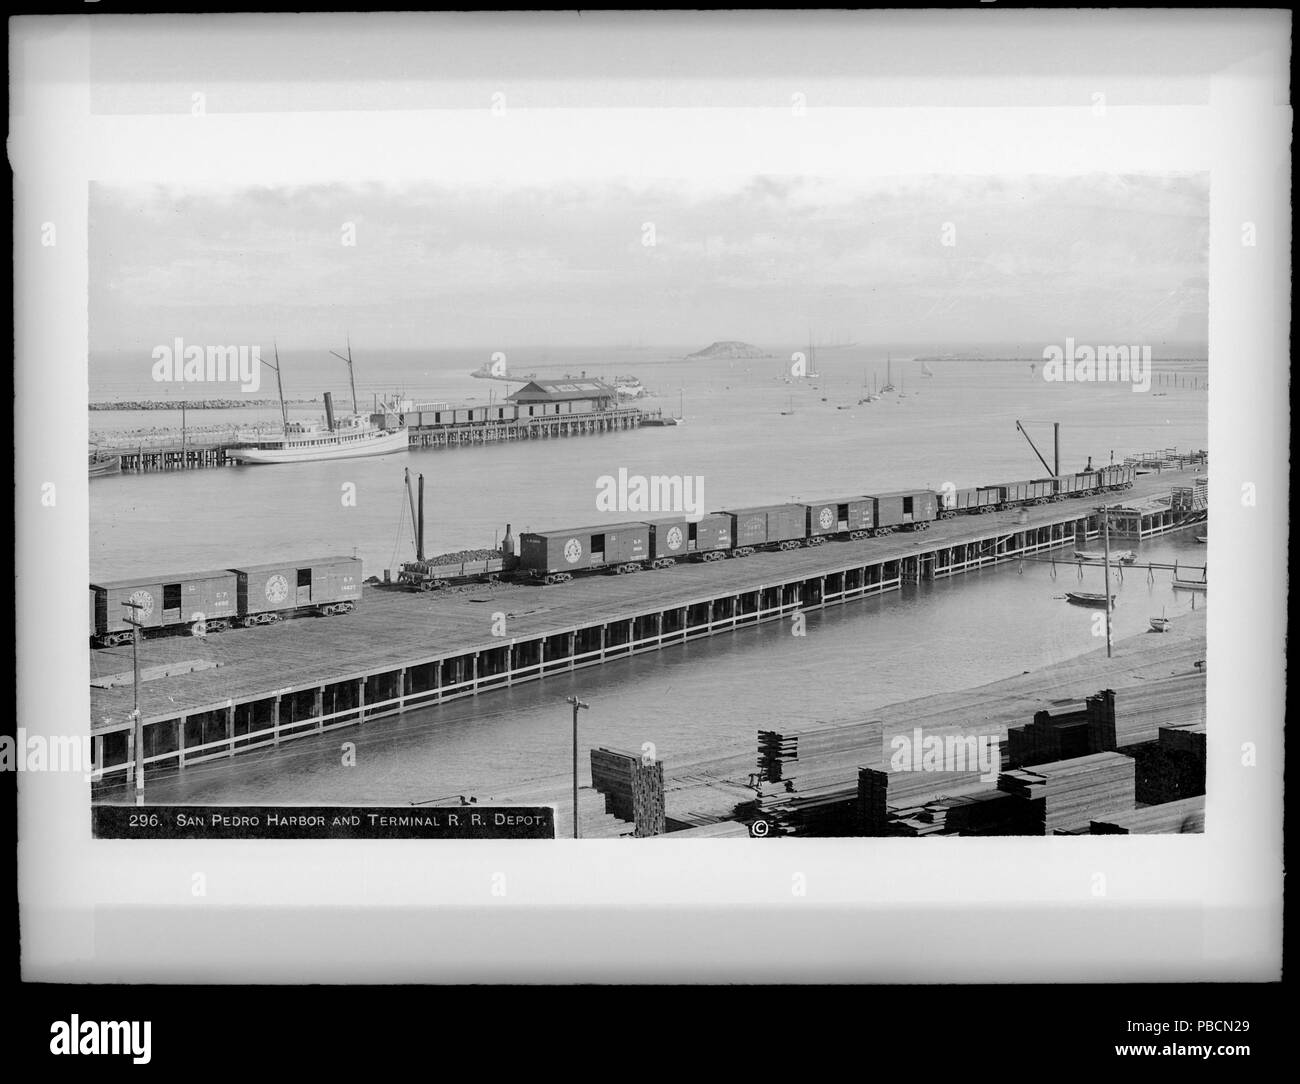 . English: Port of Los Angeles, unloading lumber, and railroad cars Photograph of the Port of Los Angeles, San Pedro Harbor and Terminal Railroad Depot, around 1905. The view is from the dock southwest to the mouth of the breakwater. Deadman's Island has not yet been removed, it is visible on the left side of the mouth. The ships which appear include both steam and sailing vessels. A railroad runs in the foreground, to the docks on which lumber has been unloaded. Another railroad appears in the background, on the other side of the channel. As Los Angeles tripled its population between 1900 and Stock Photo